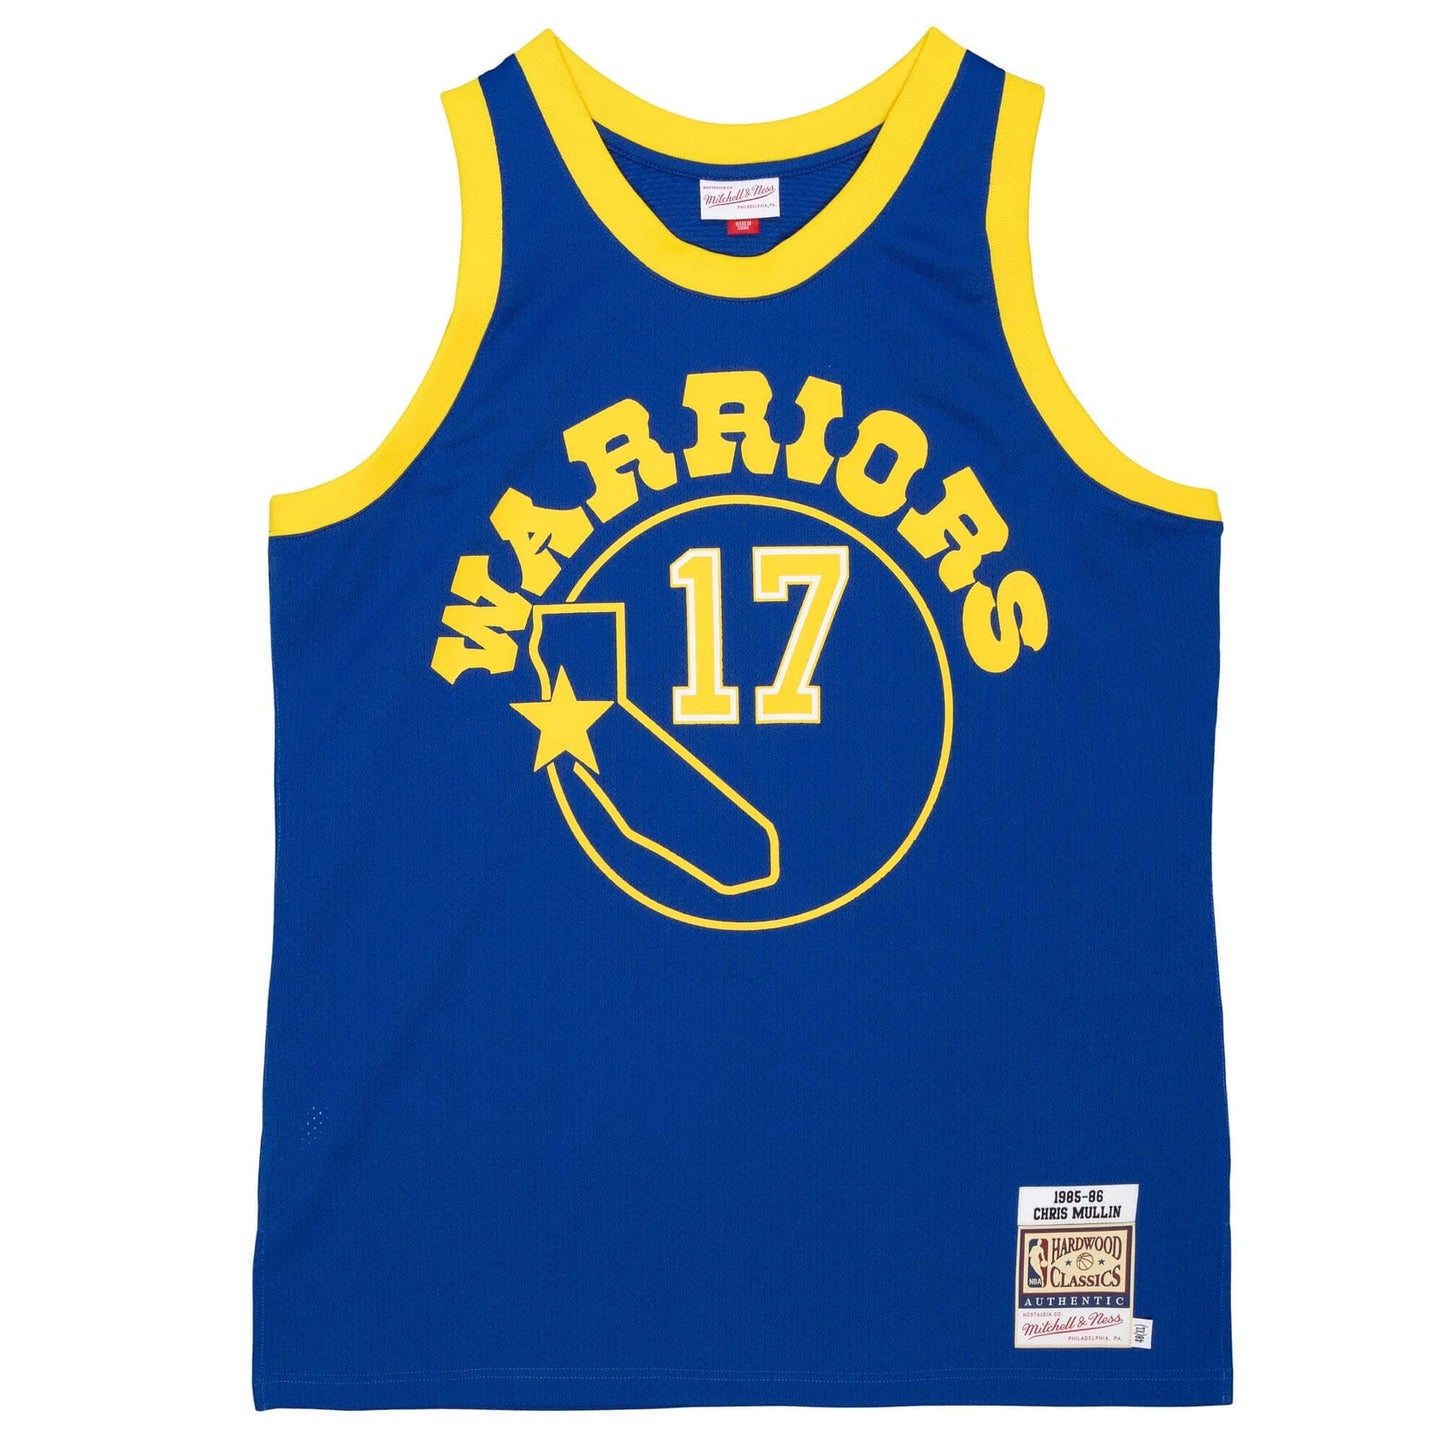 Authentic Chris Mullin Golden State Warriors 1985-86 Jersey